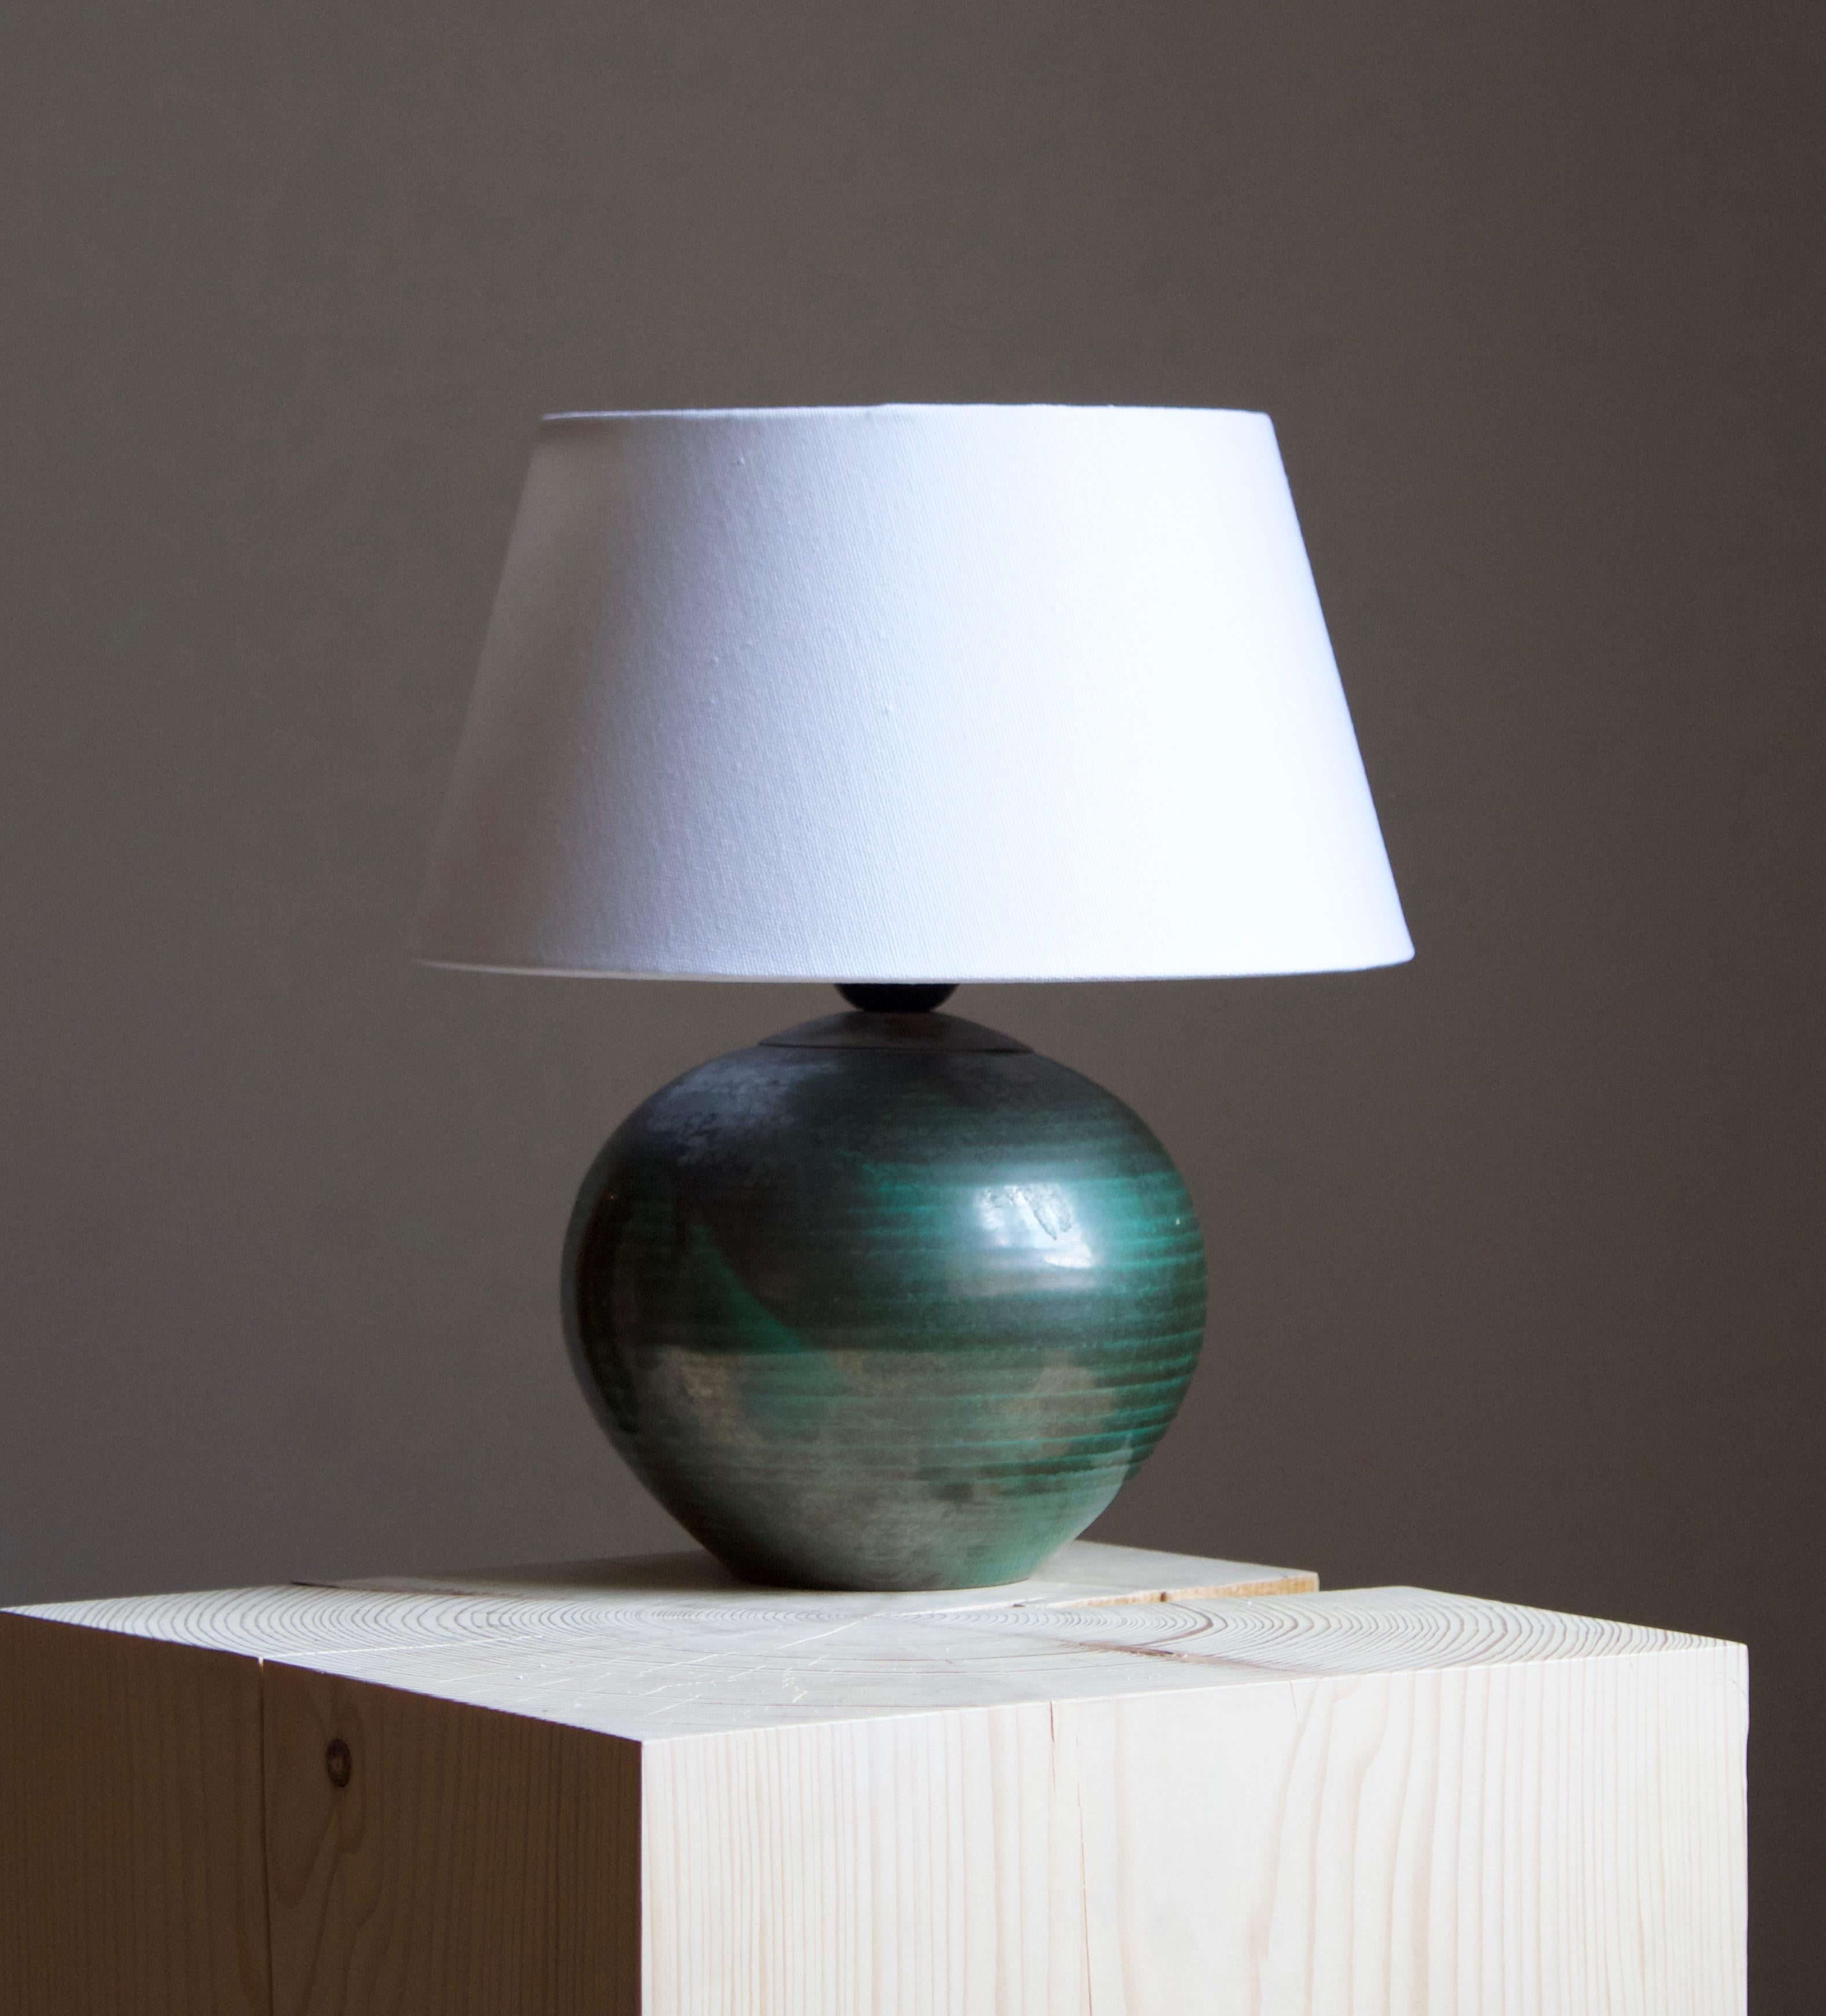 An early modernist table lamp. by Upsala-Ekeby, Sweden, 1930s. Stamped. 

Stated dimensions exclude lampshade. Height includes the socket. Sold without lampshade.

Other designers of the period include Ettore Sottsass, Carl Harry Stålhane, Lisa